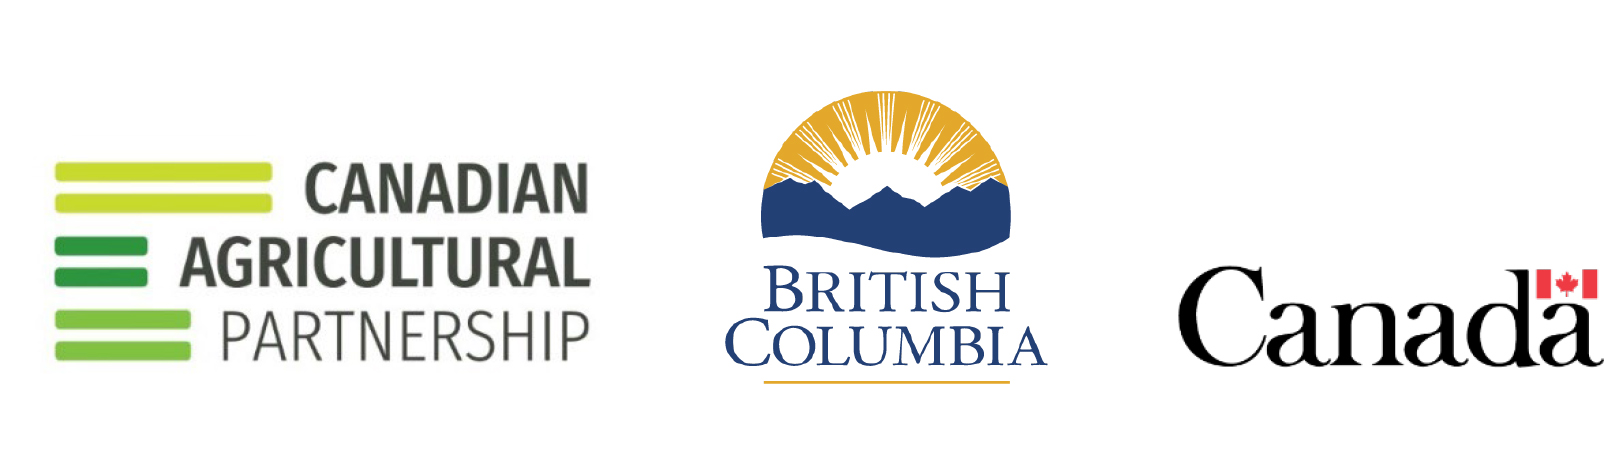  Funding for the Knowledge and Technology Transfer program is provided by the governments of Canada and British Columbia through the Canadian Agricultural Partnership, a federal-provincial-territorial initiative.